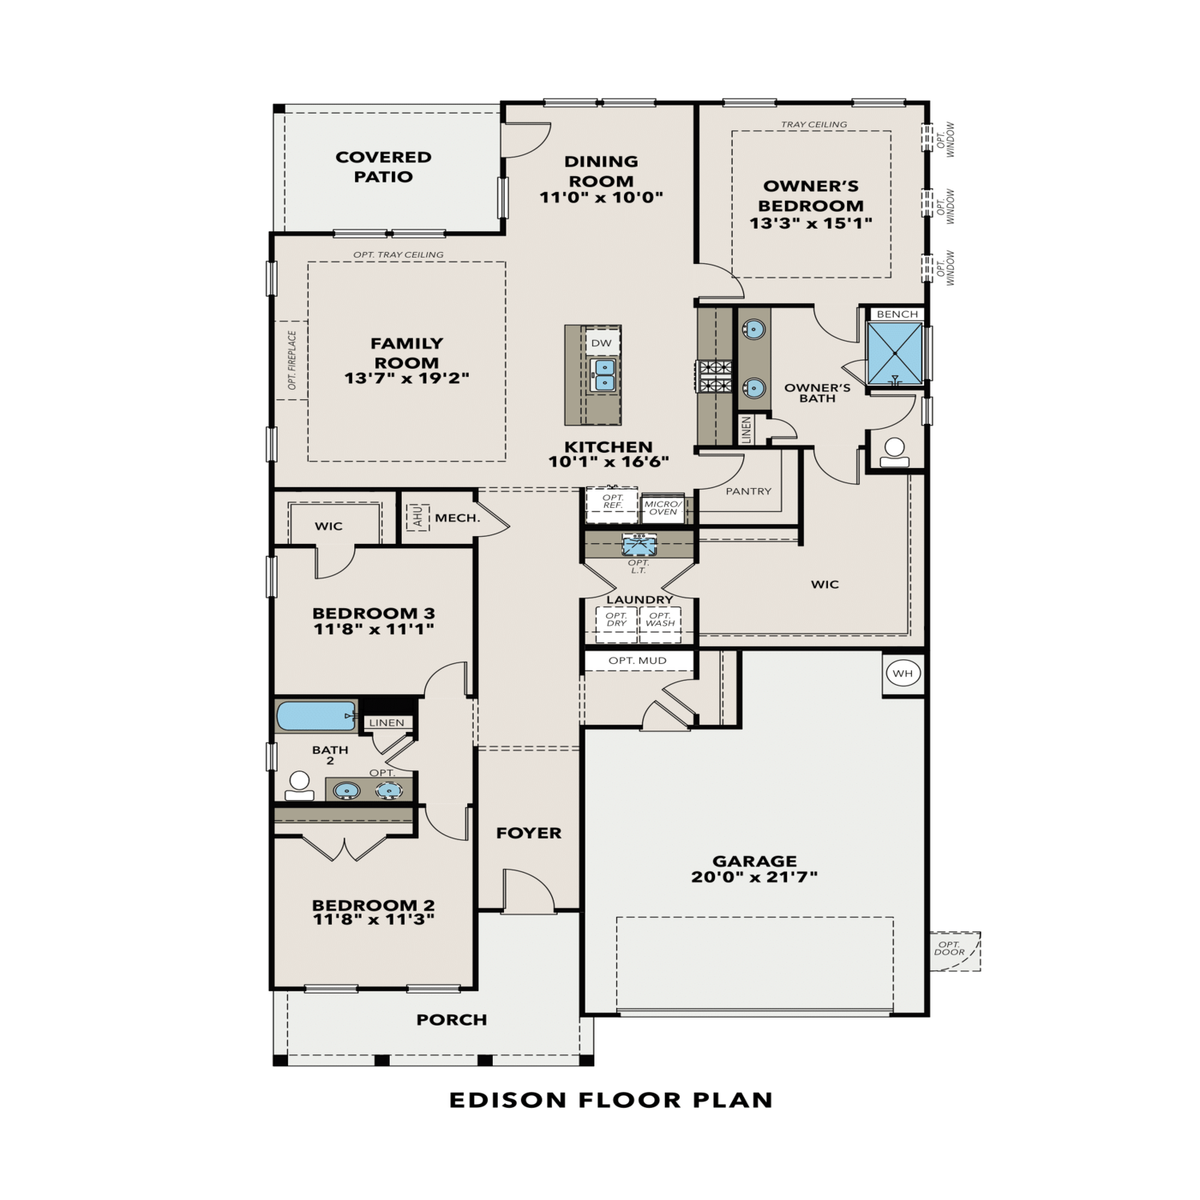 1 - The Edison A buildable floor plan layout in Davidson Homes' Kelly Preserve community.